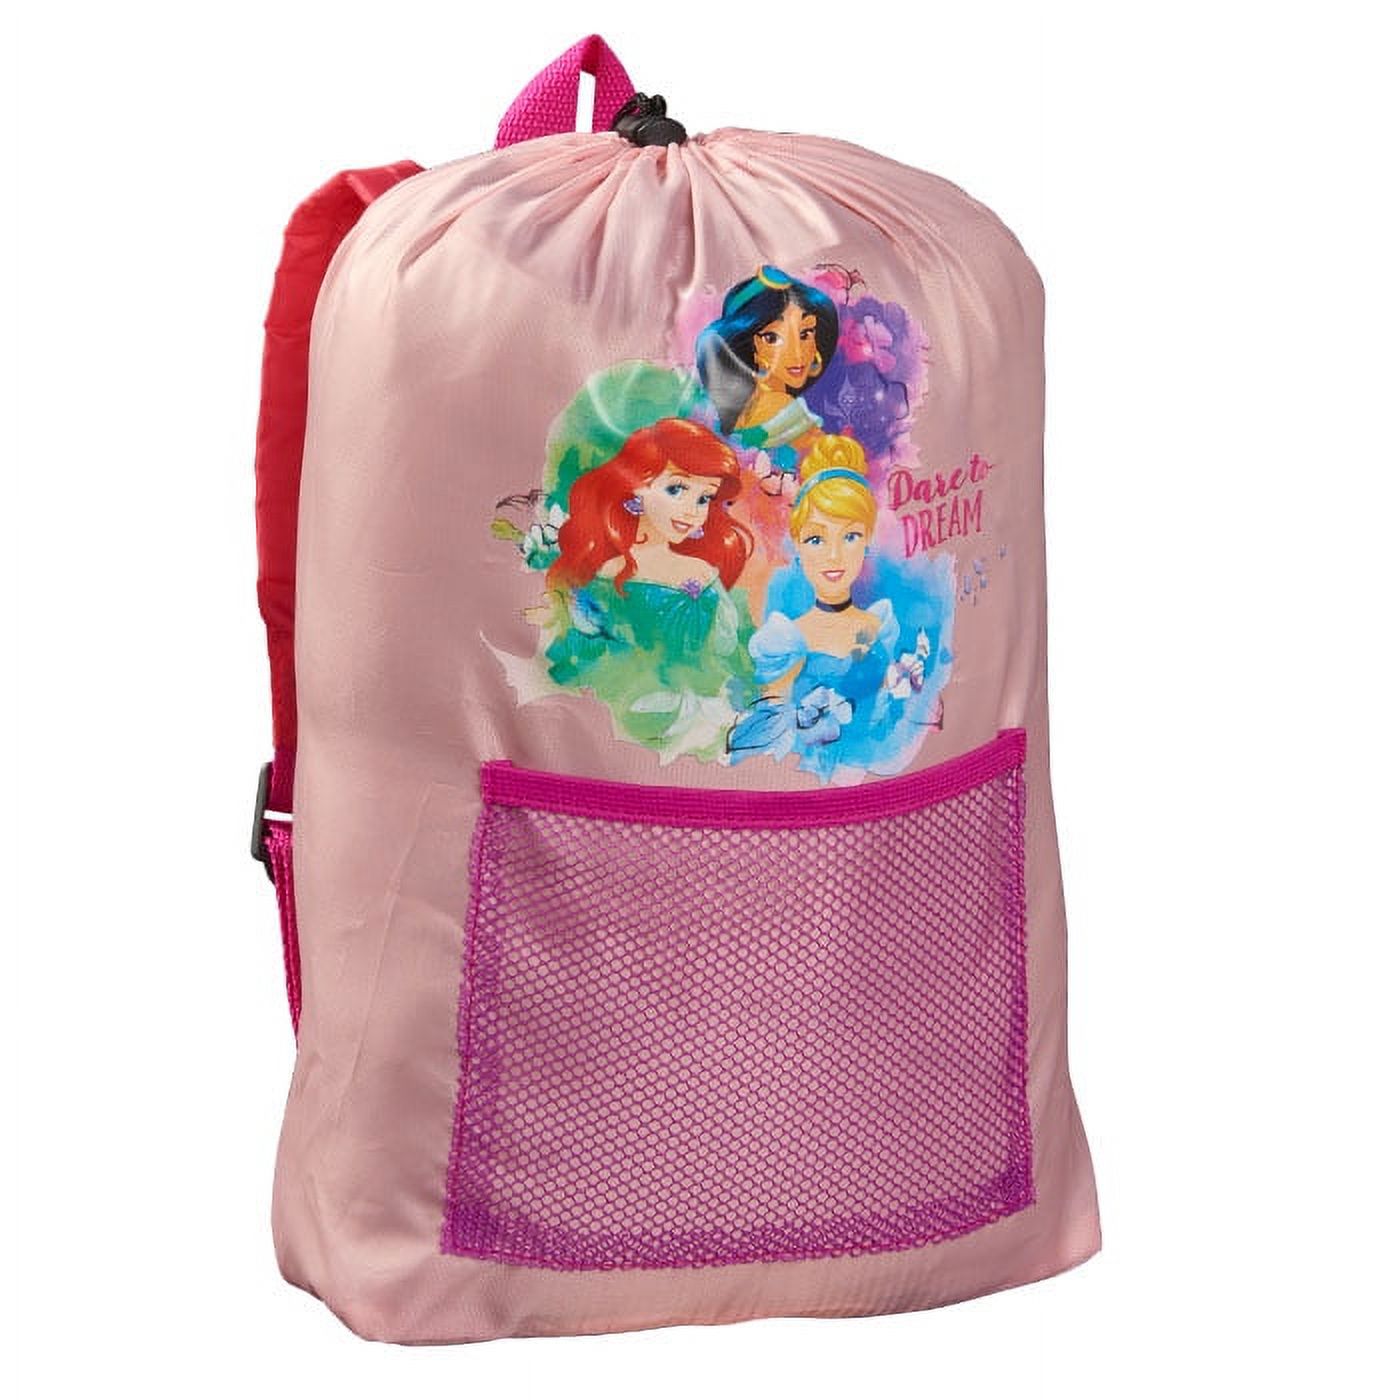 Disney Princess Kid's Indoor/Outdoor Unisex 4-Piece Sling Kit, Ages 4+, Multi-Color, Dome Tent, One Room - image 4 of 8